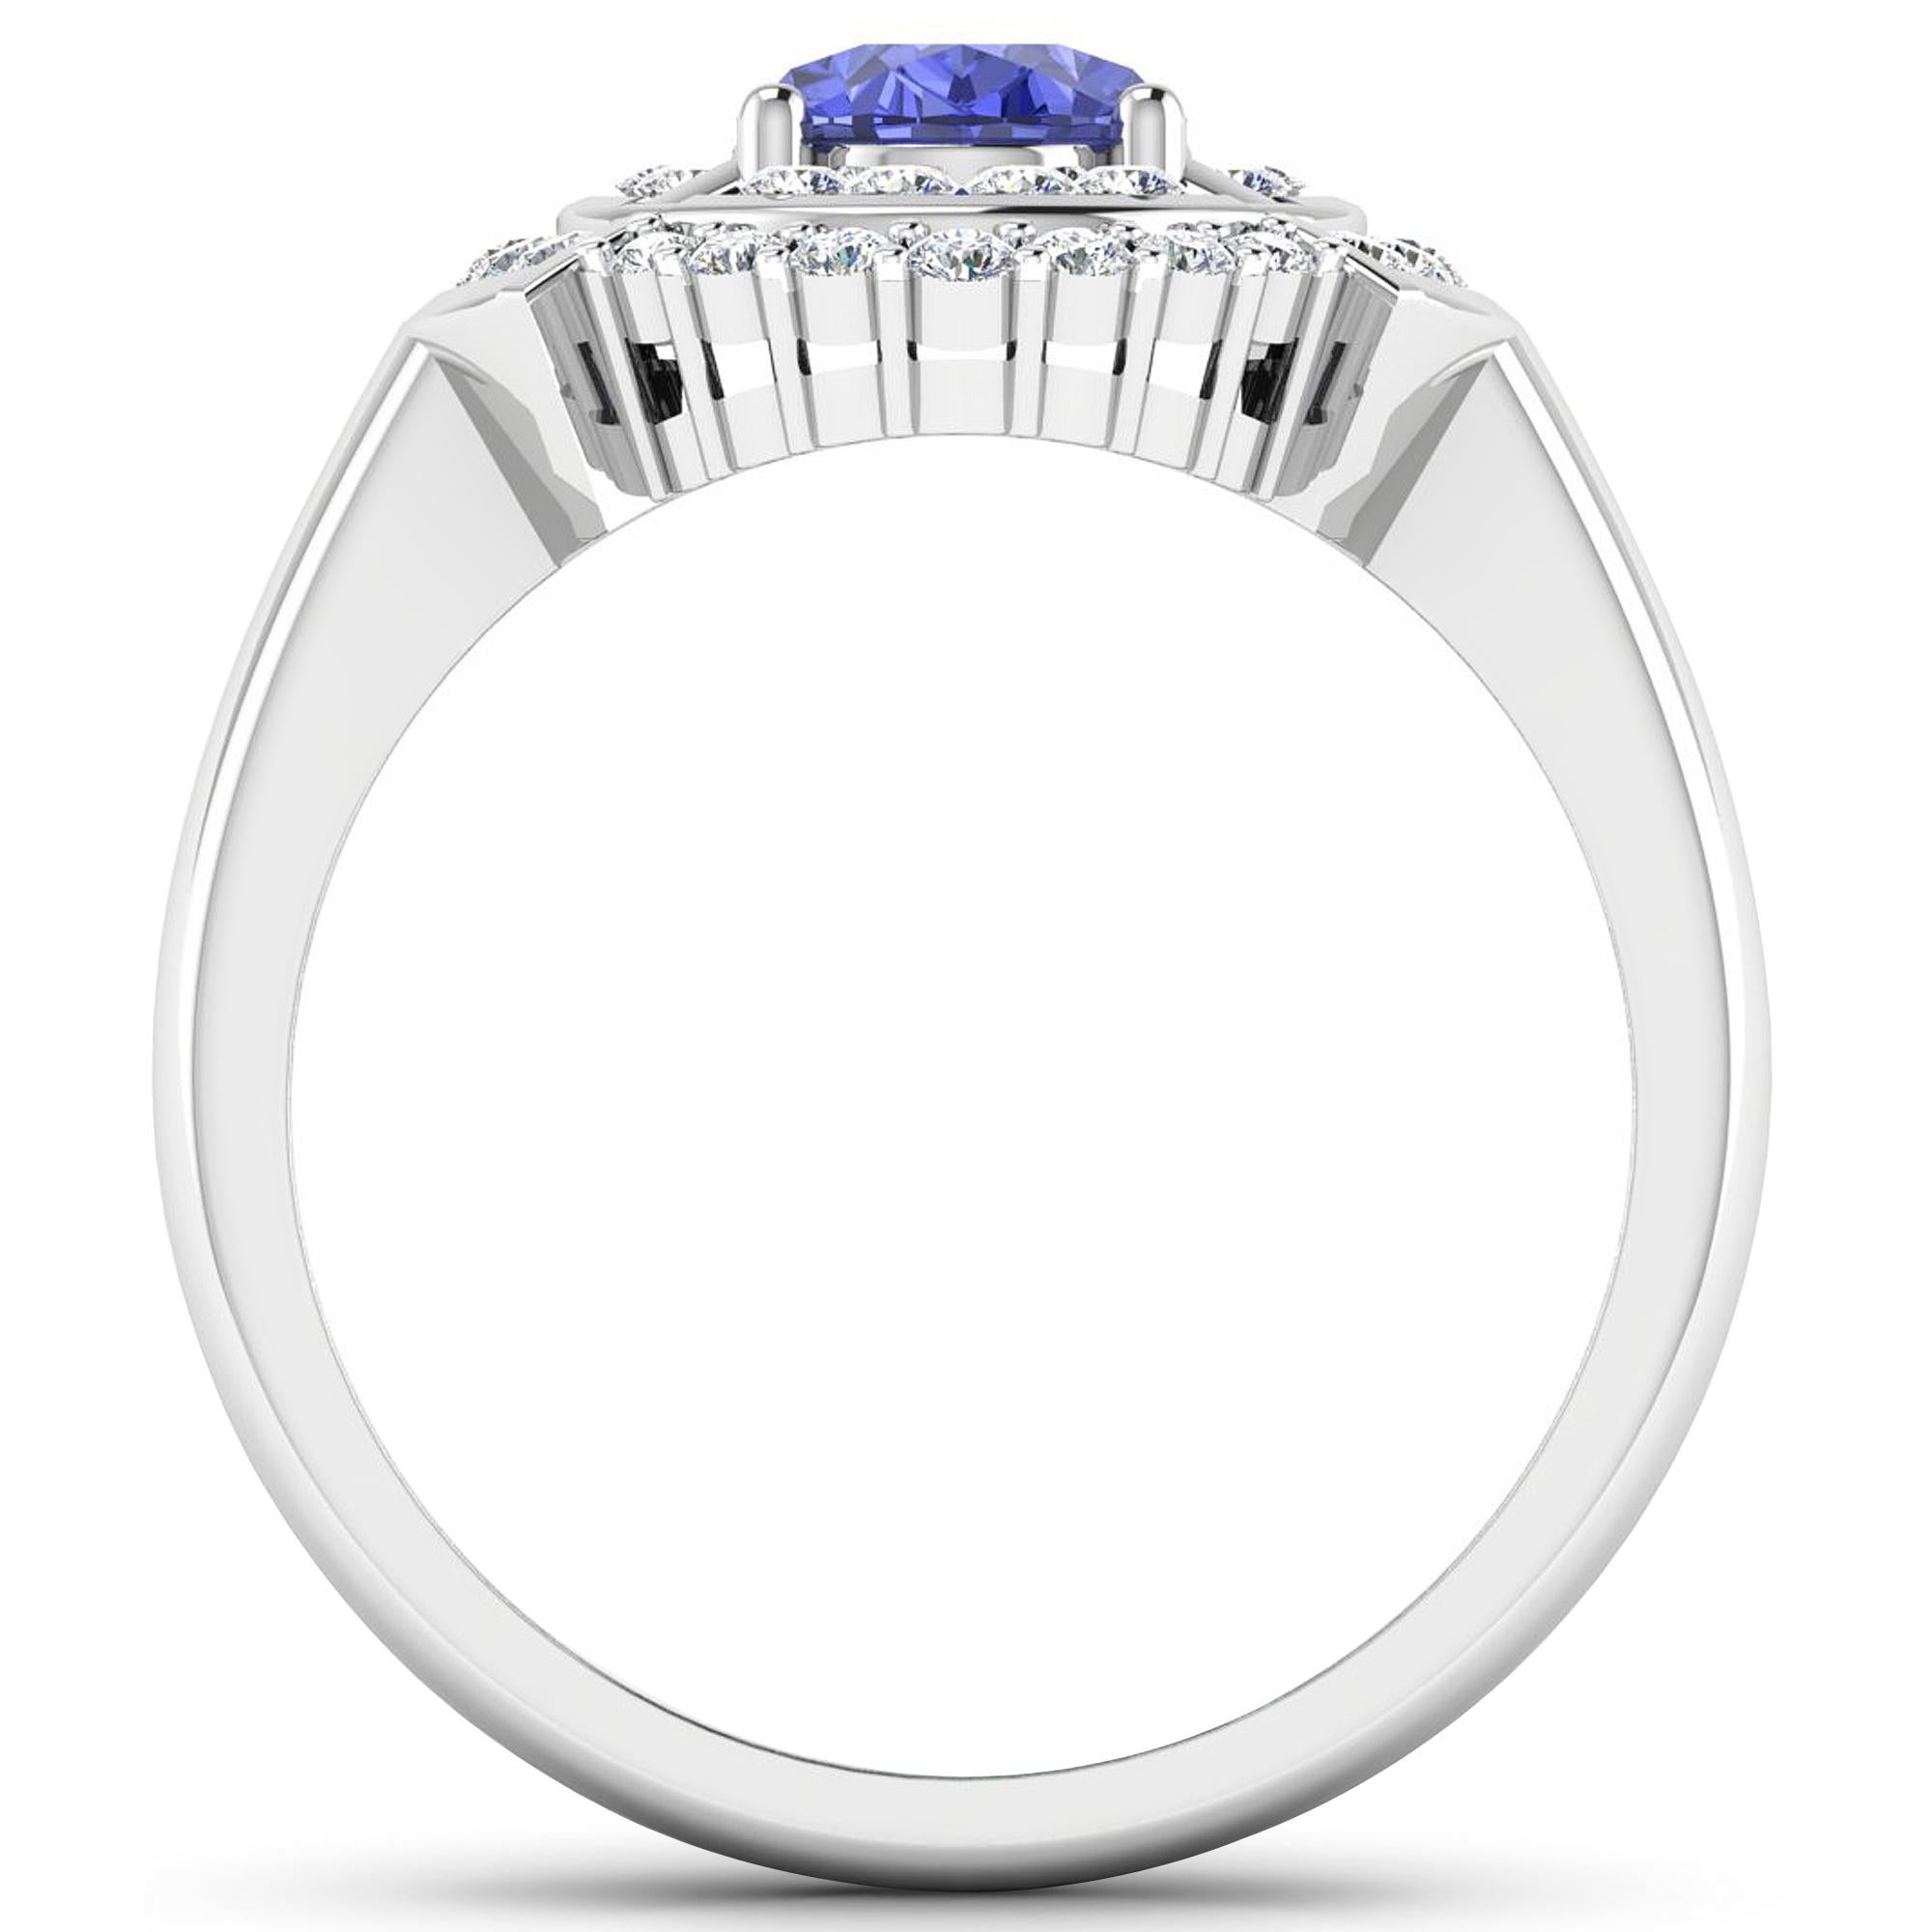 Tanzanite Gold Ring, 14Kt Gold Tanzanite & Diamond Engagement Ring, 1.62ctw.

Flaunt yourself with this 14K White Gold Tanzanite & White Diamond Engagement Ring. The setting is inlaid with 38 accented full-cut White Diamond round stones for a total